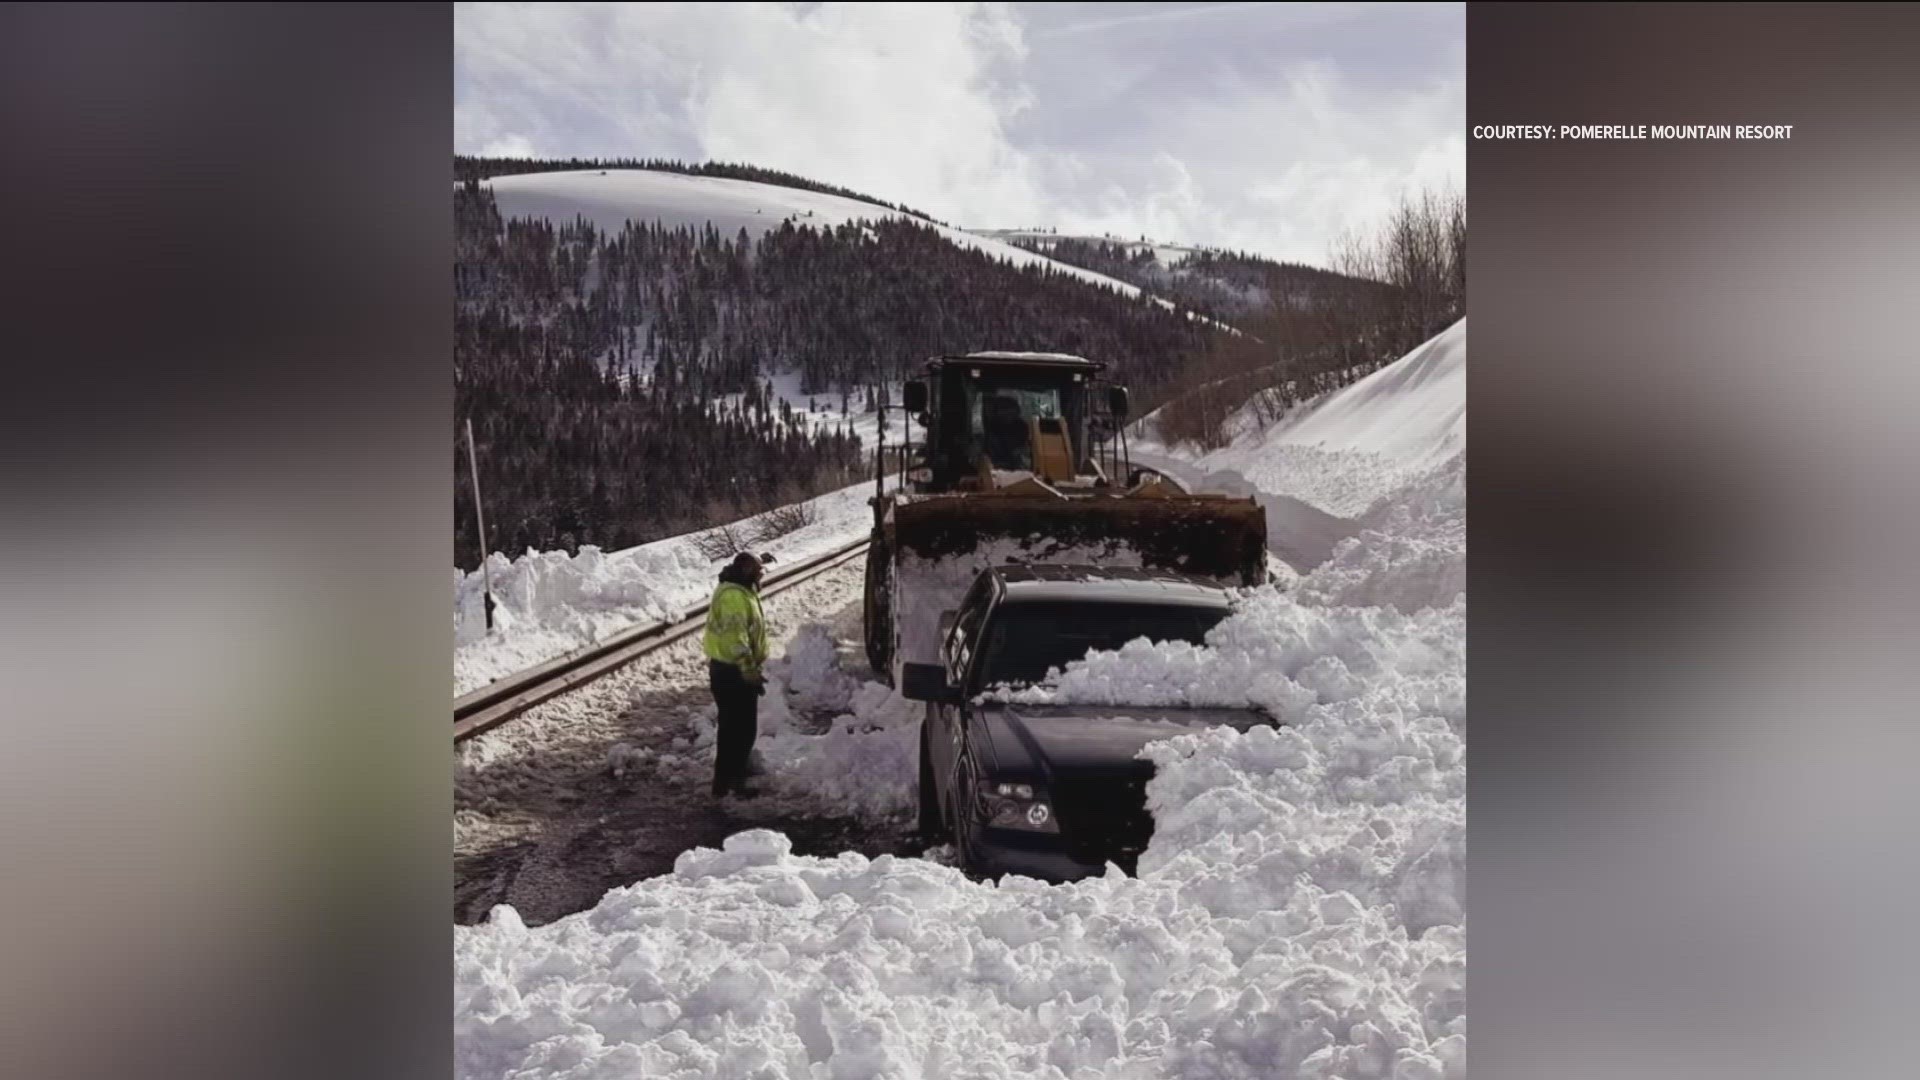 Pomerelle Mountain Resort was closed Tuesday for avalanche mitigation on Howell Canyon Road. No one was injured in the slide and the resort will reopen on Wednesday.